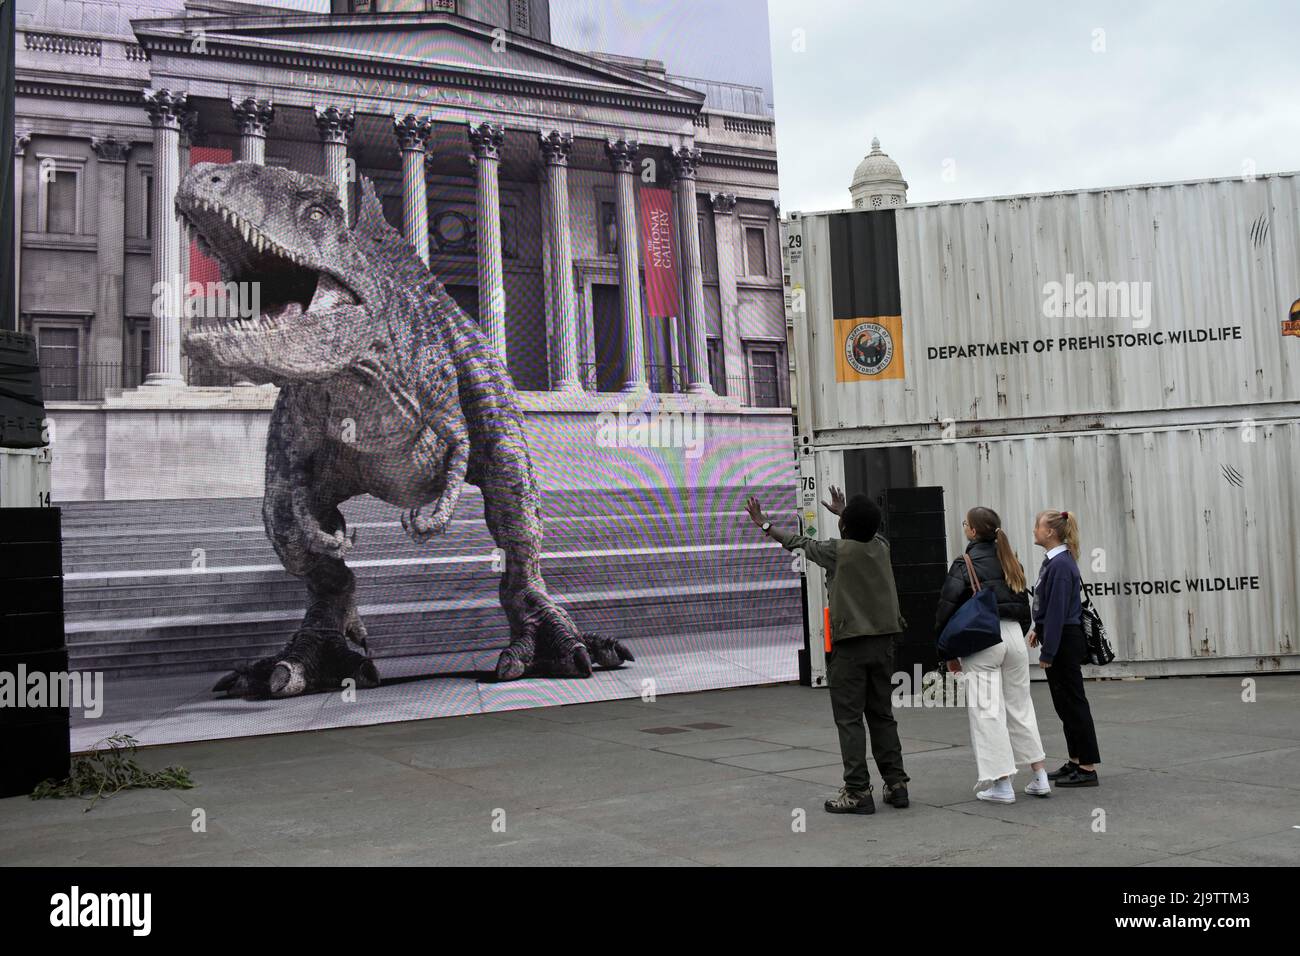 25th May, 2022. London, UK, Jurassic World life size virtual reality dinosaur meets people on Trafalgar Square accompanied by the dinosaur's keeper. The film comes to cinemas on June 10 2022. Credit: JOHNNY ARMSTEAD/Alamy Live NewsTyrannosaurus rex (rex meaning 'king' in Latin), often called T. rex or colloquially T-Rex Stock Photo